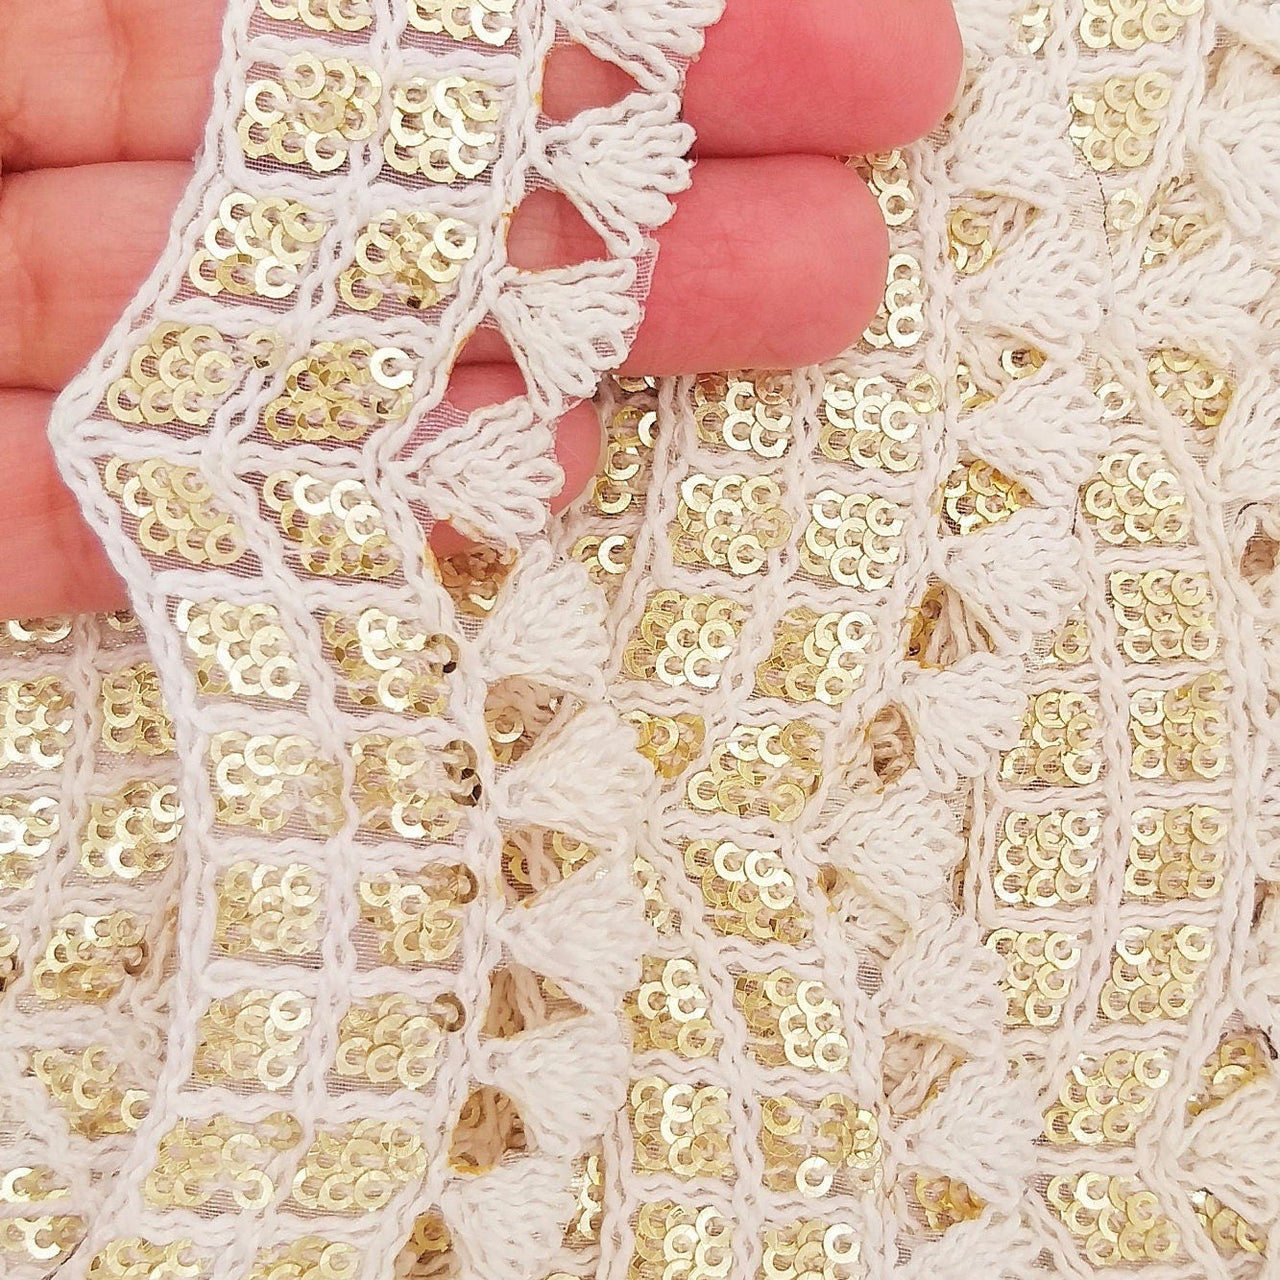 Nine Yards Off White Scallop Lace Trim Embroidered with Gold Sequins, Cutwork Trim, Scallops Wedding Trim